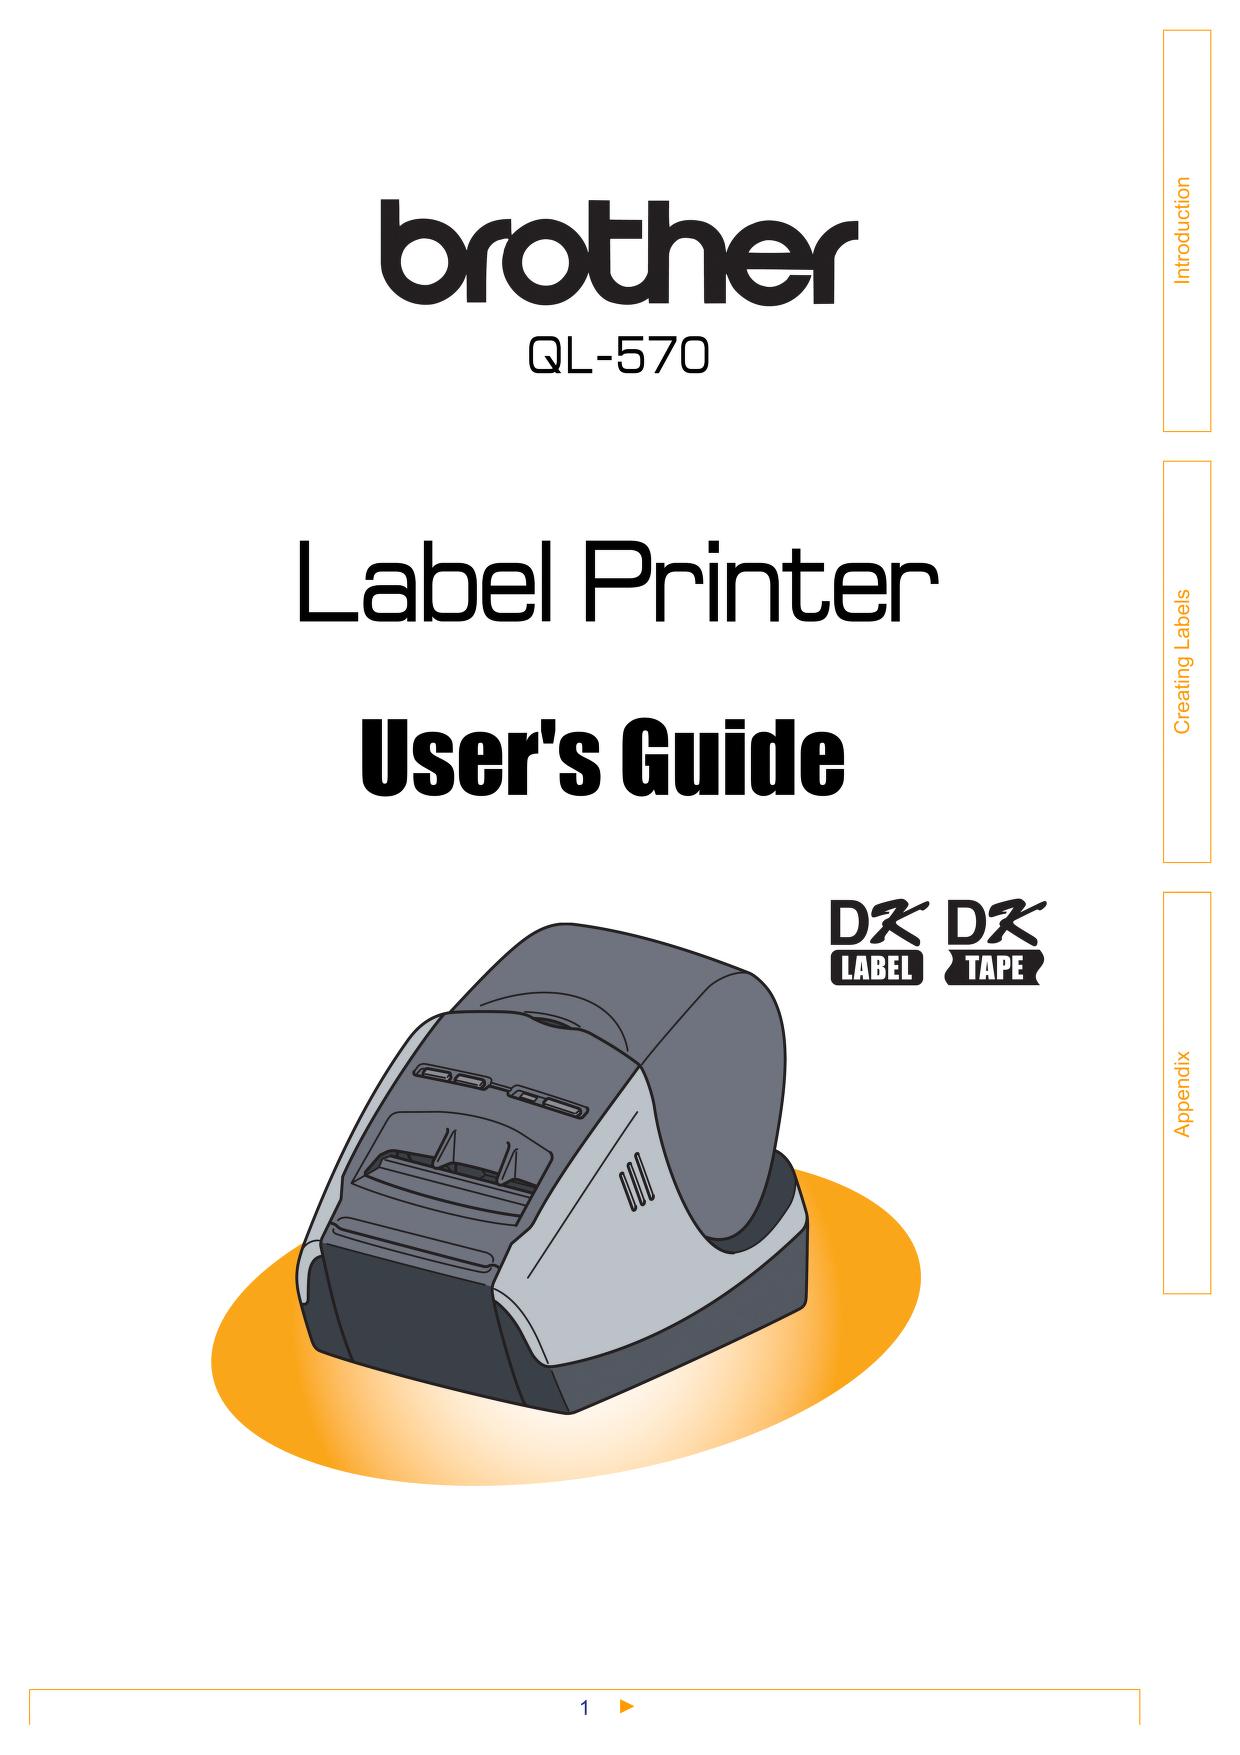 Schijnen Ligatie Samenhangend Brother QL 570 - P-Touch B/W Direct Thermal Printer User guide : Free  Download, Borrow, and Streaming : Internet Archive